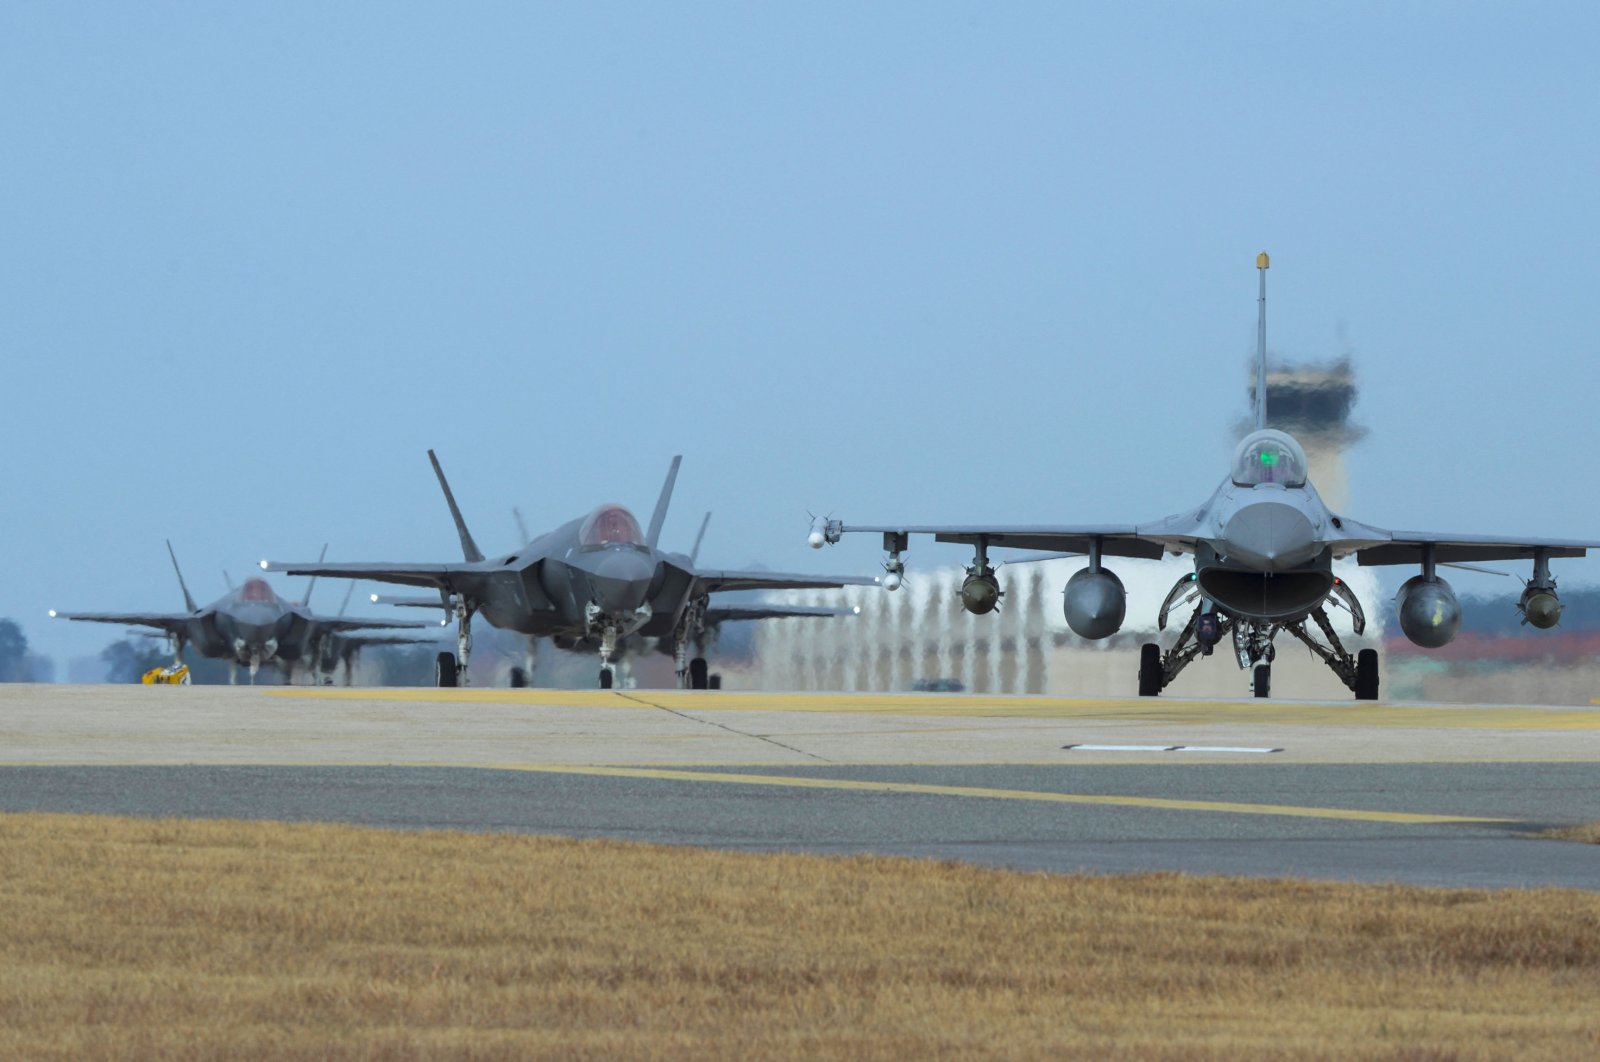 U.S. Air Force F-16 Fighting Falcon (R) and F-35A Lightning II fighter jets taxiing at Kunsan Air Base in the southwestern port city of Gunsan, South Korea. (Photo by U.S. Air Force via AFP)